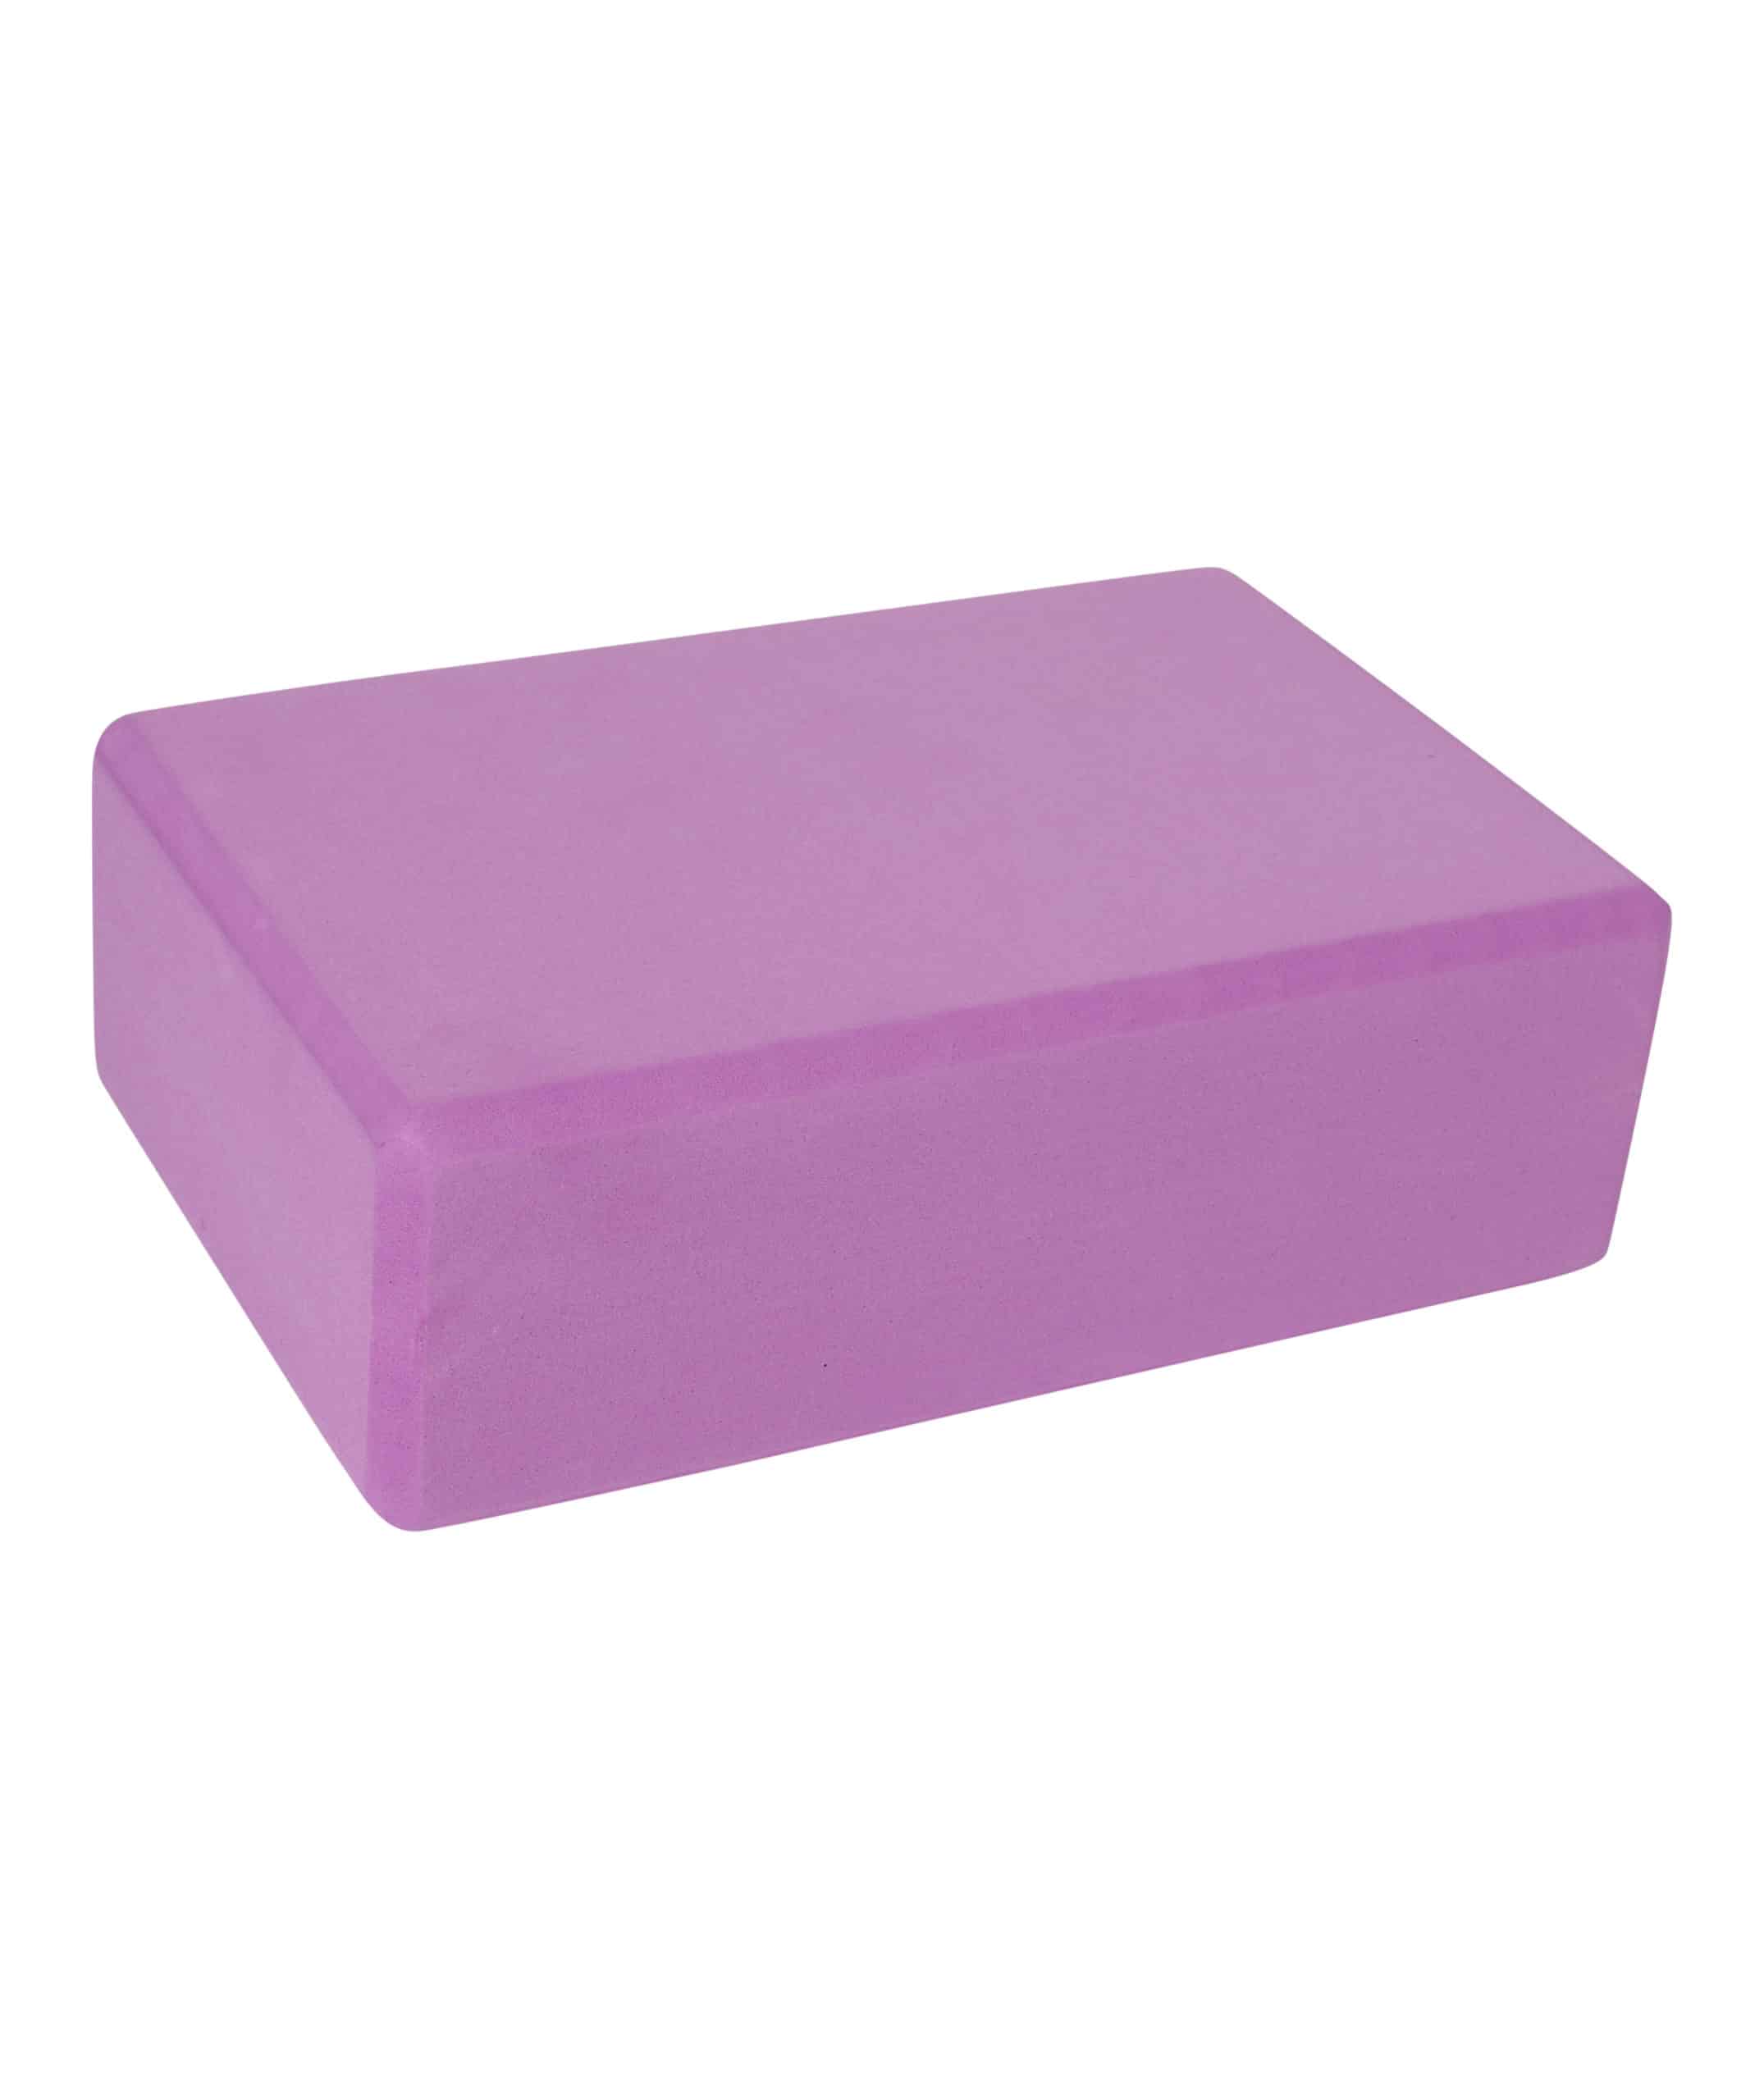 purple yoga block with carved edges made in soft touch smooth strong foam